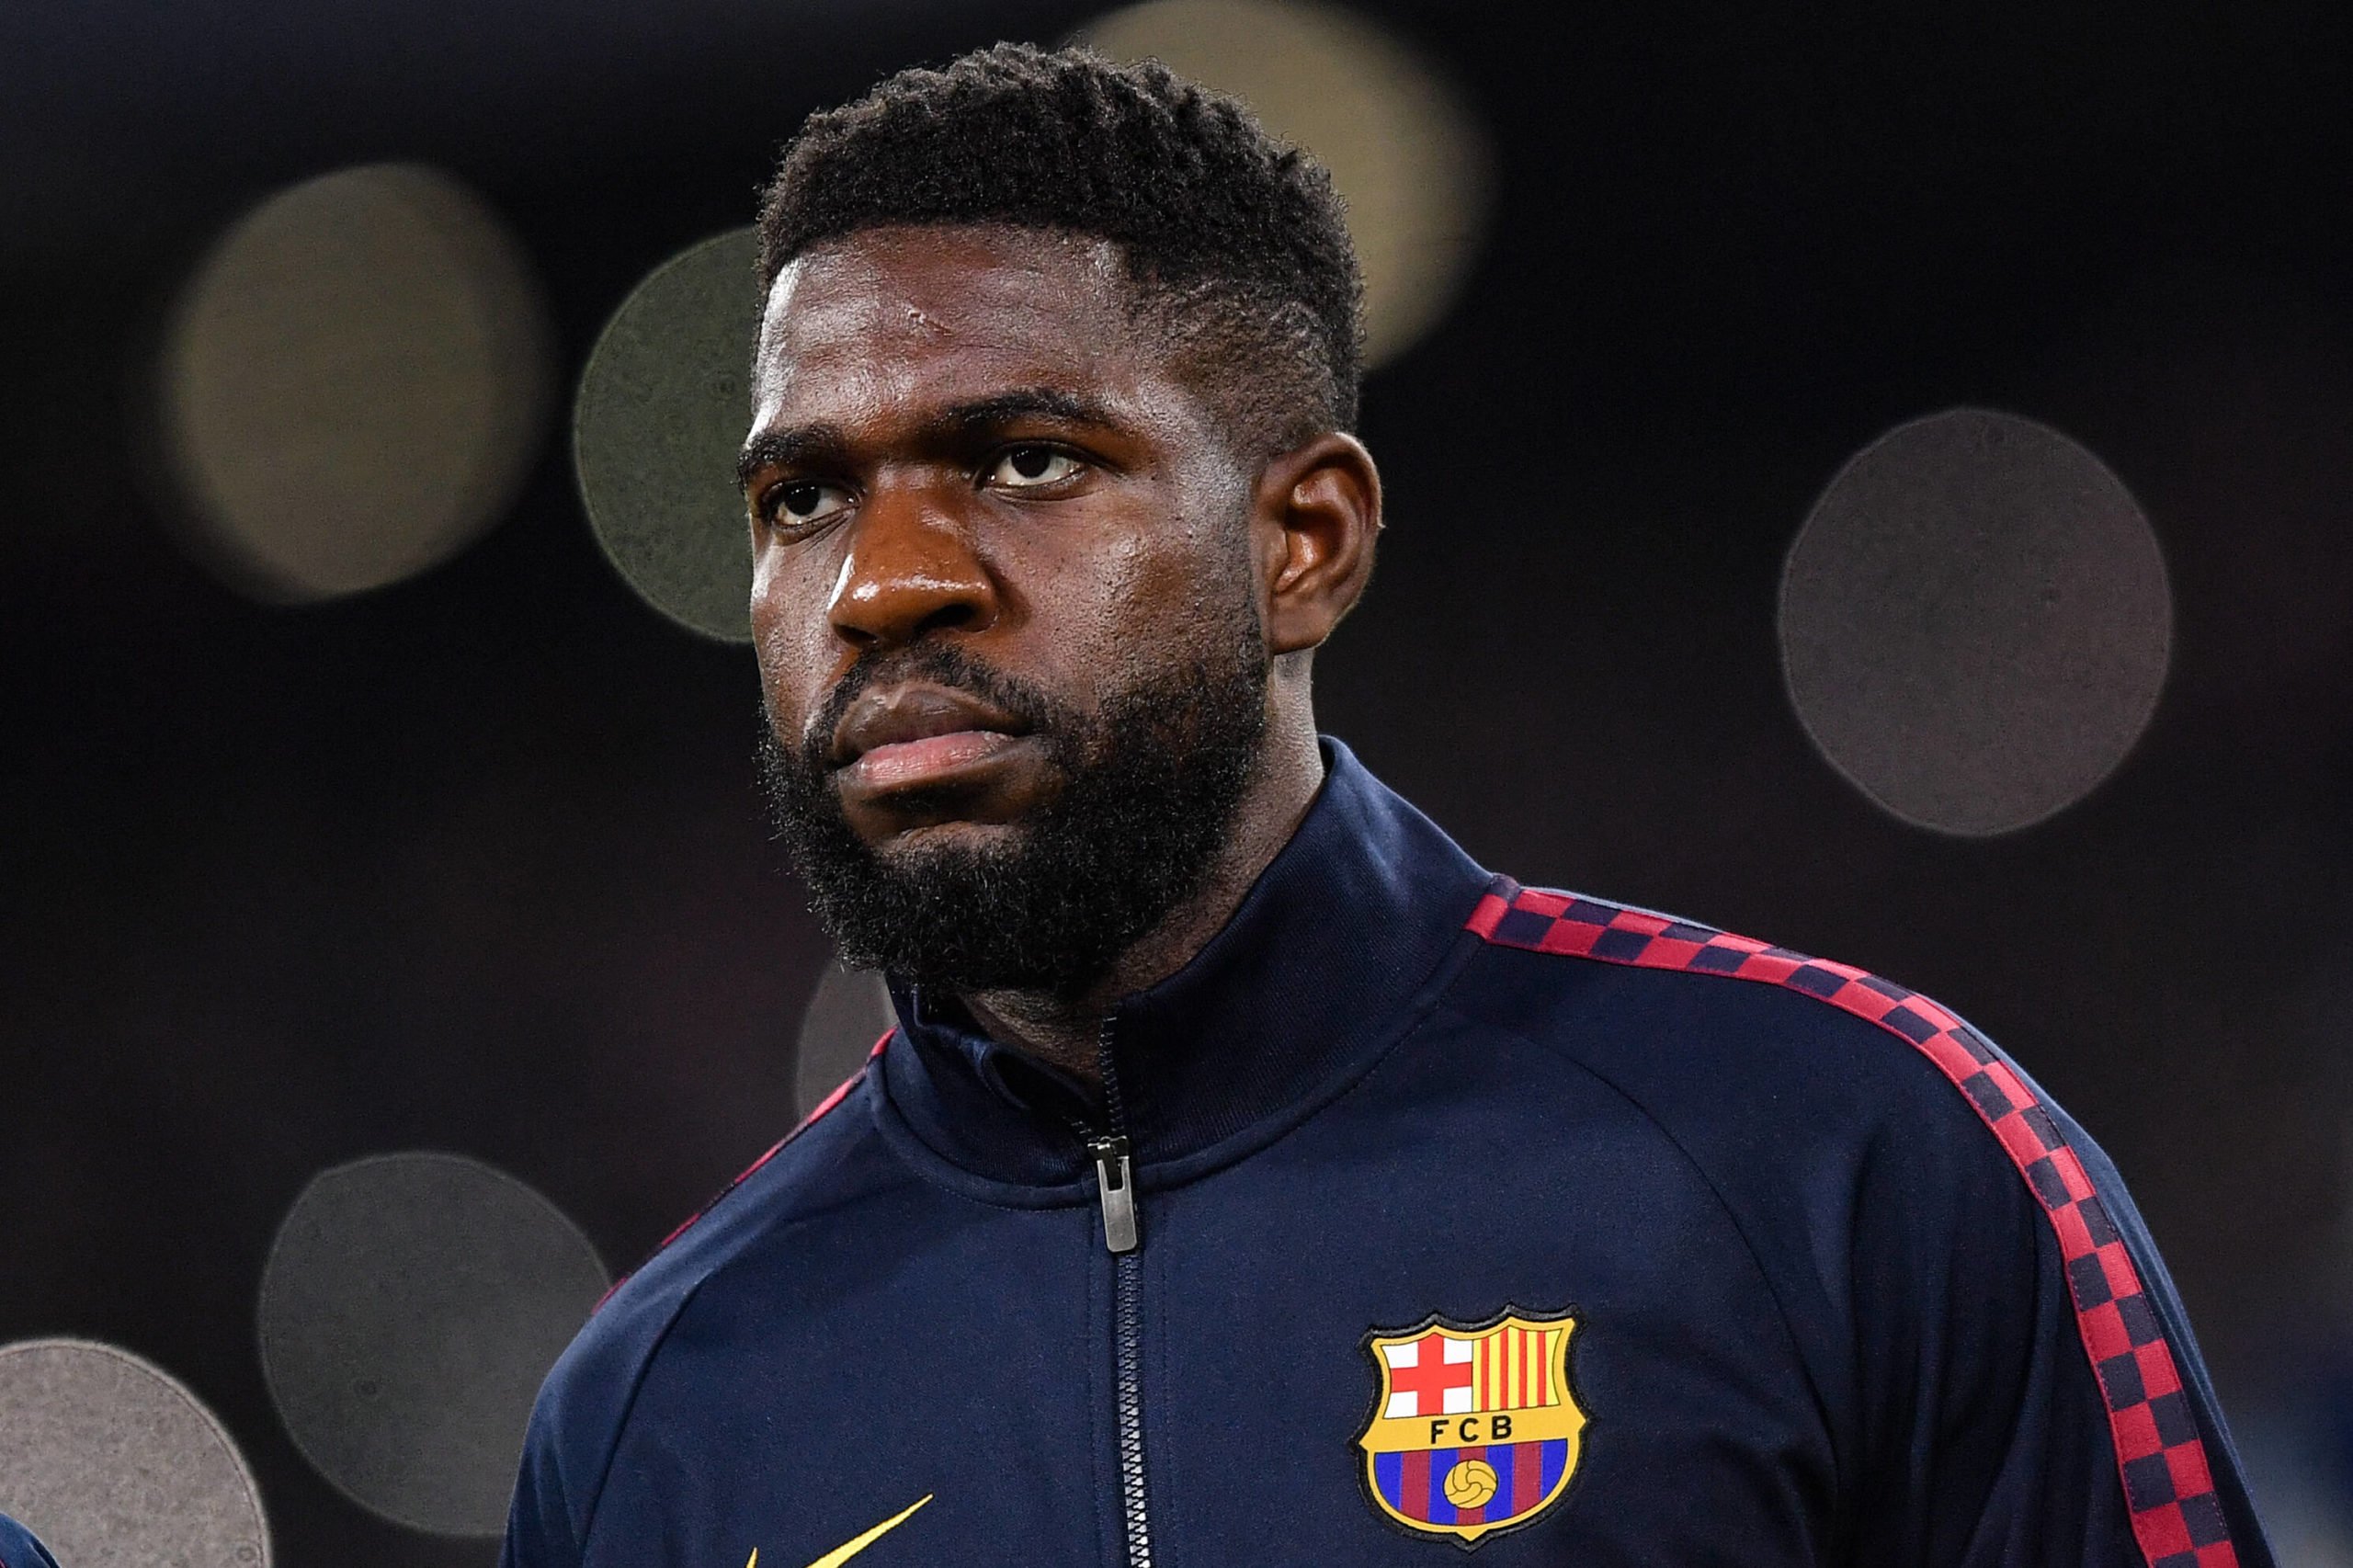 Benfica are hesitant to land Barcelona's Umtiti who is seen in the picture